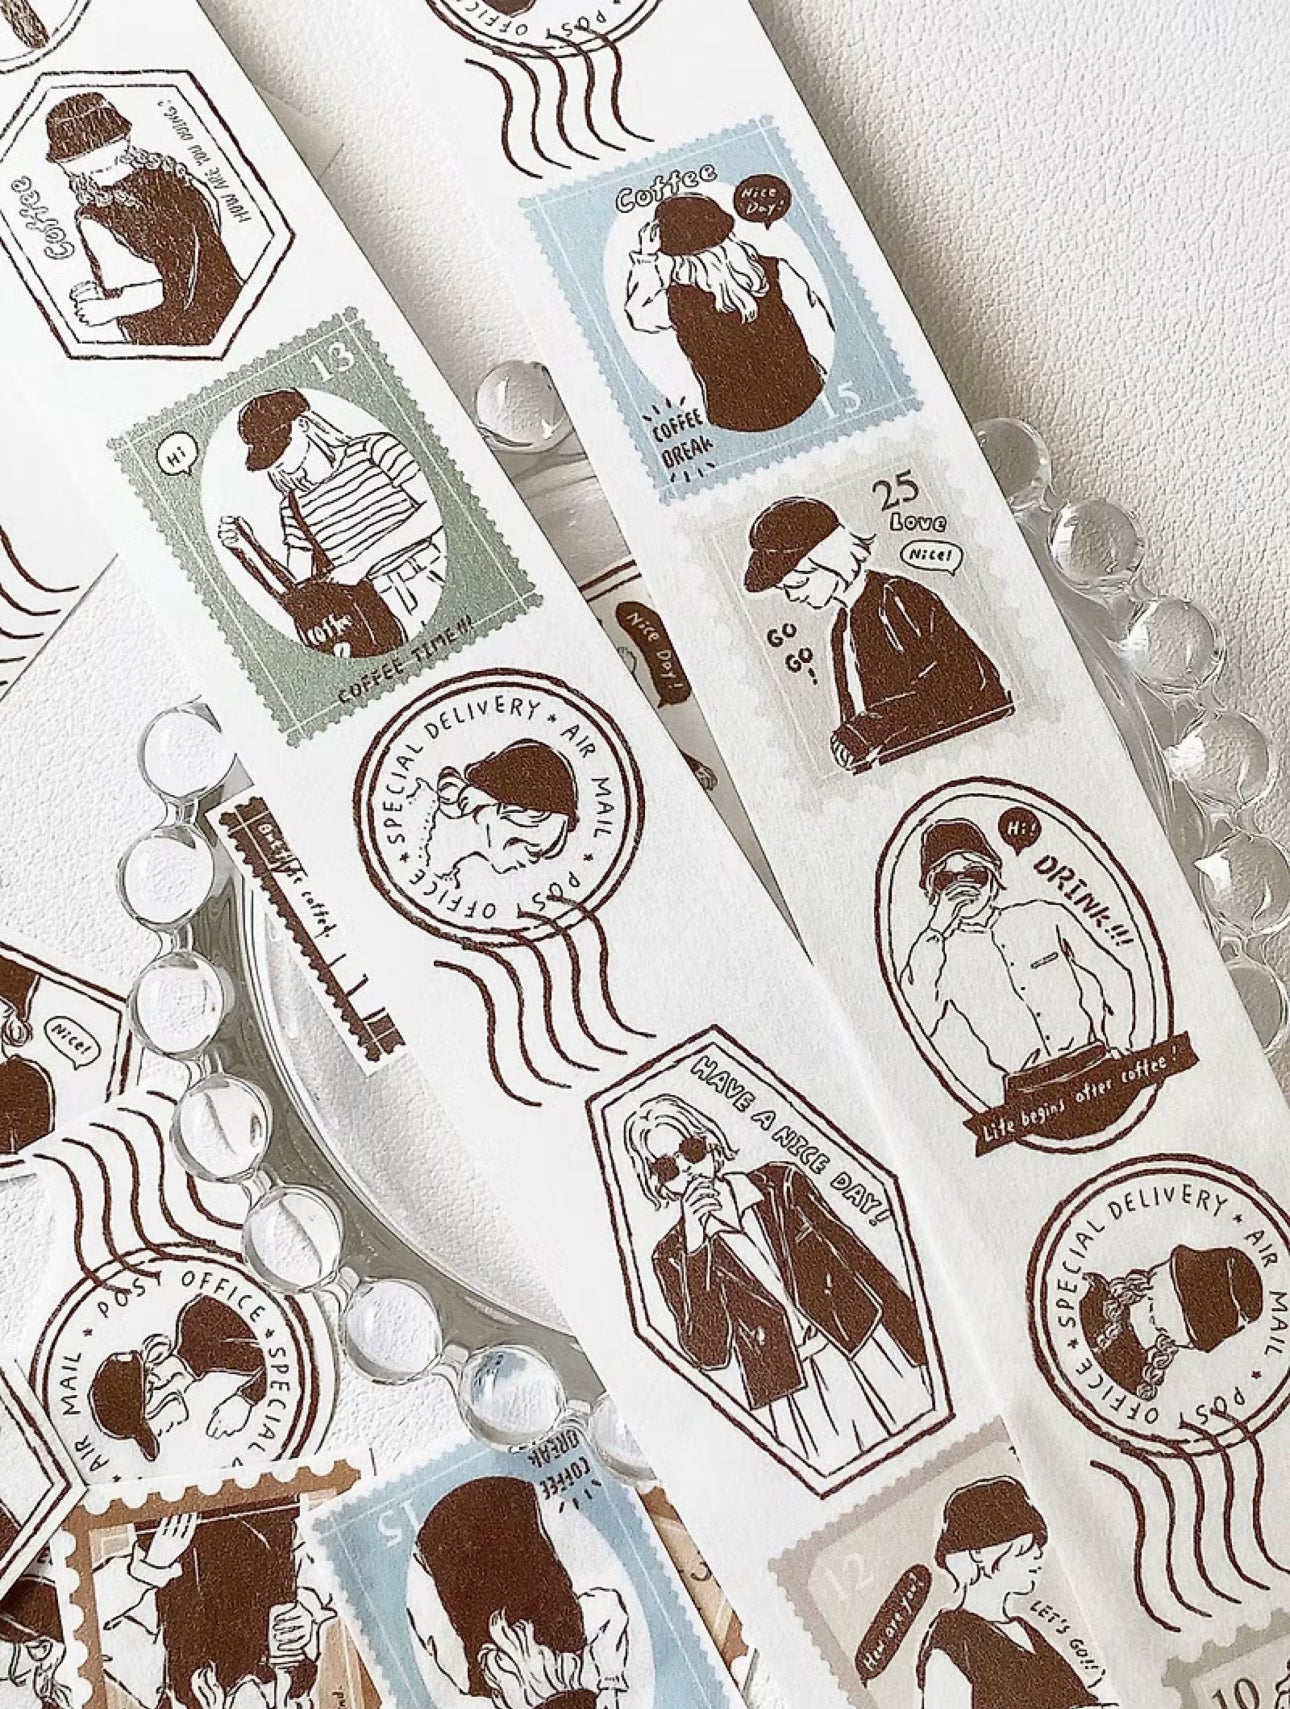 Cozyroom - Coffee Girl Stamp | 3cm Washi Tape |  Release Paper